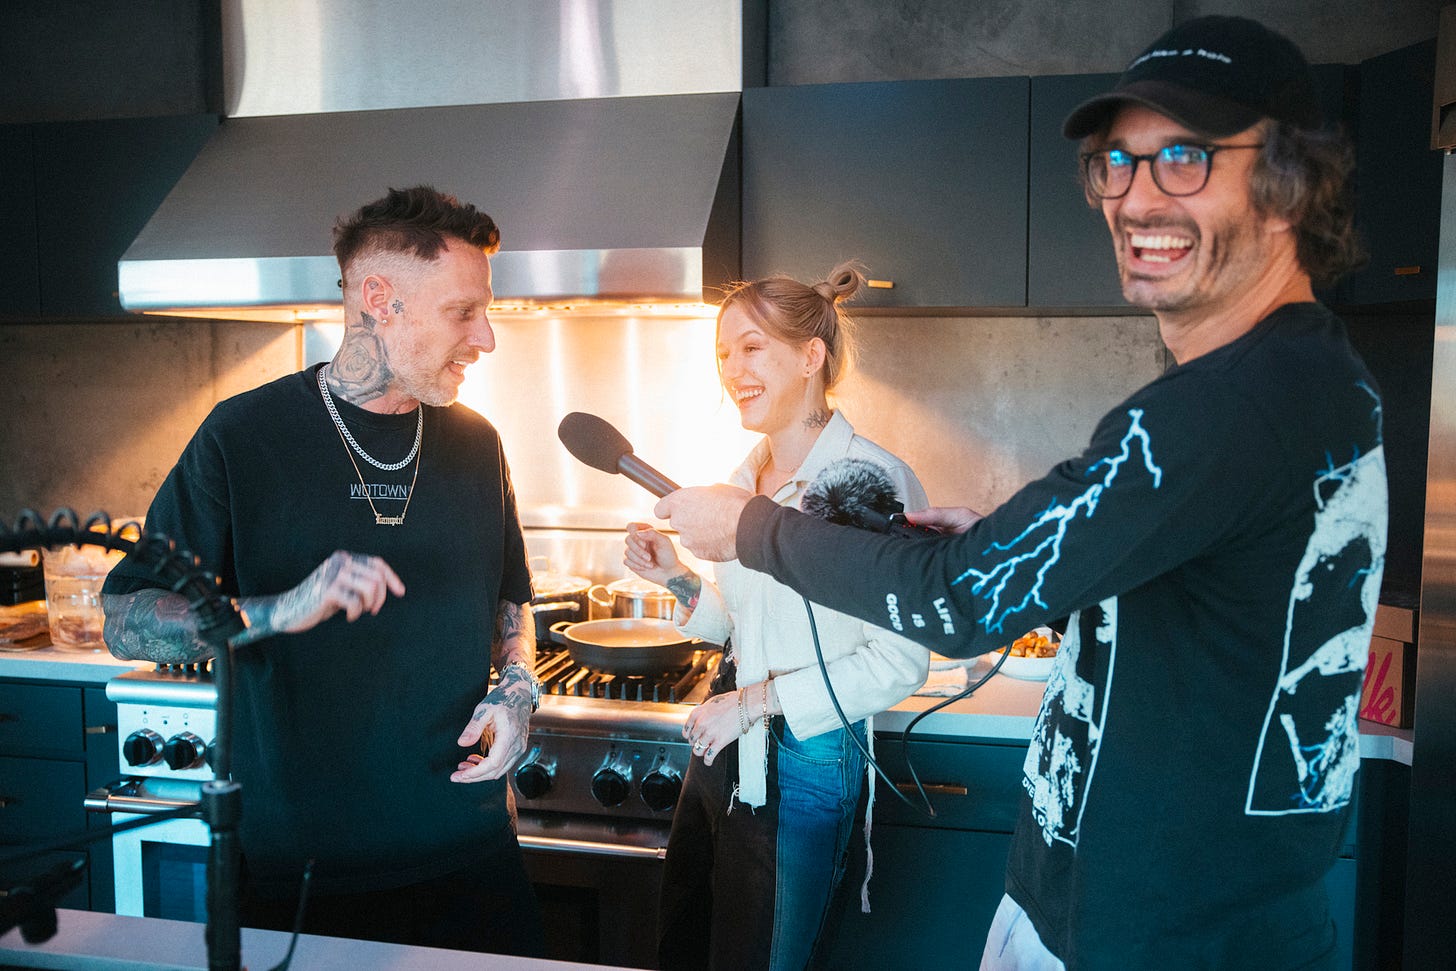 Celebrity chef Michael Voltaggio, actor Bria Vinaite, and me all grinning in the kitchen as a turkey cooks